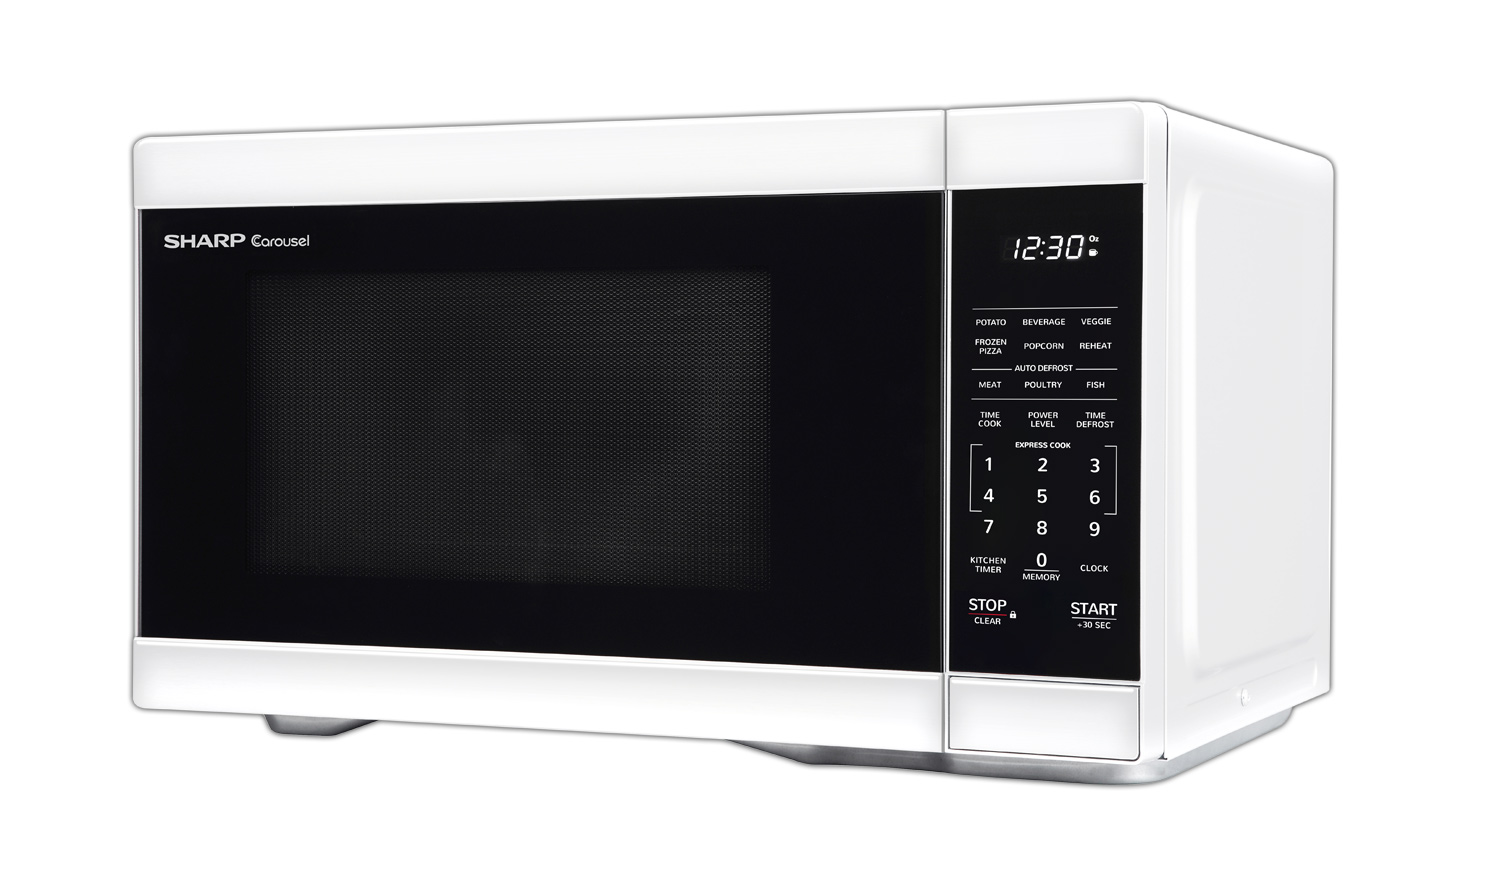 Express Toaster Oven